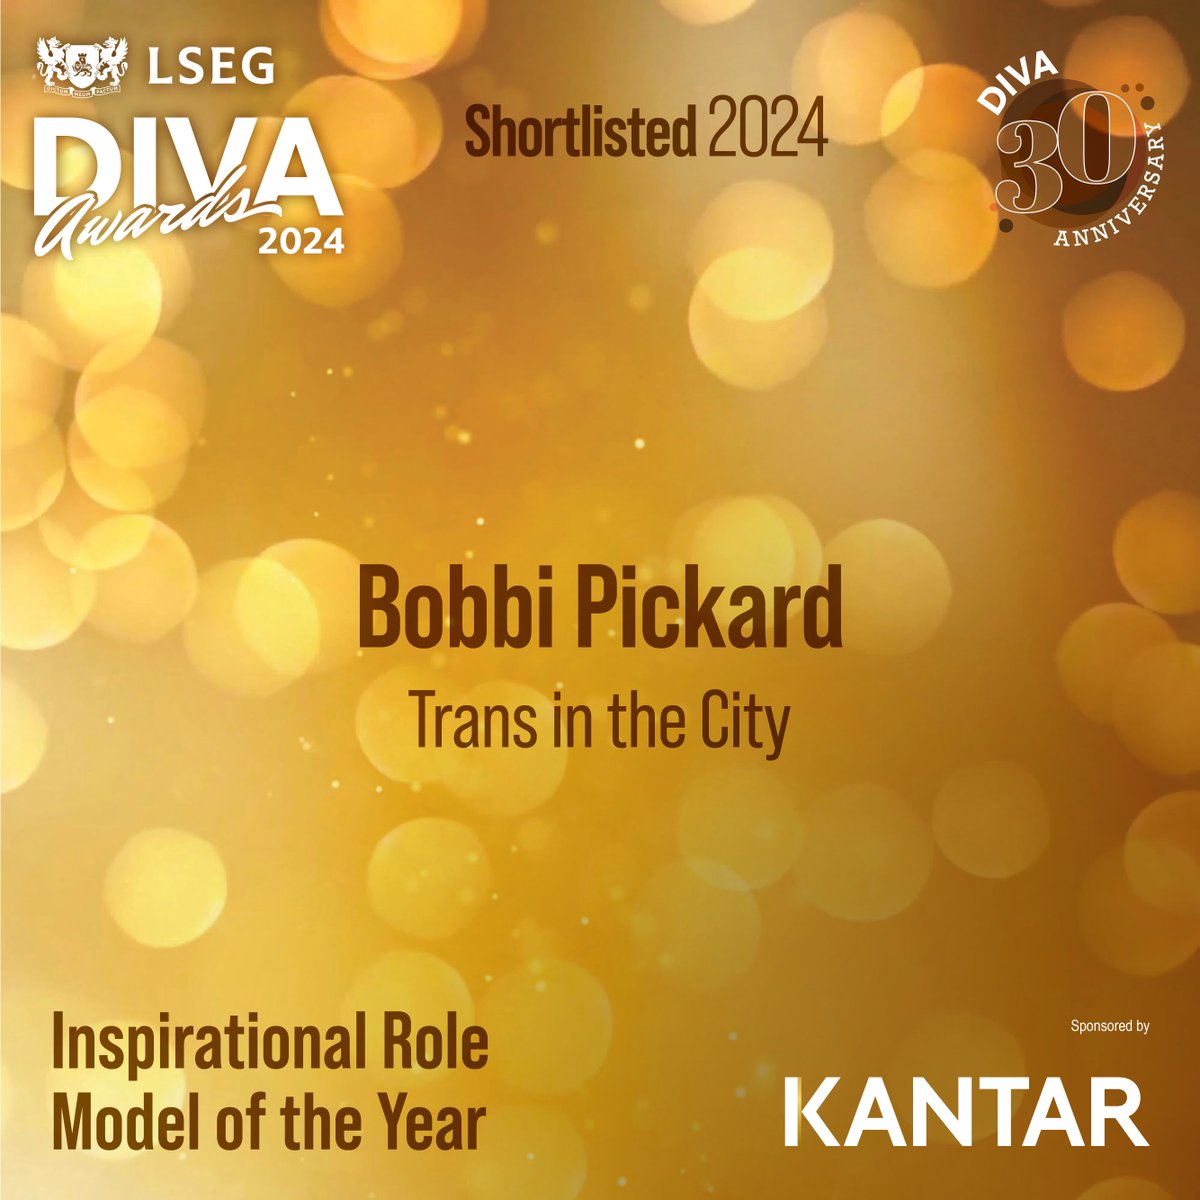 Shortlisted for the @Kantar Inspirational Role Model of the Year Award is #BobbiPichard from @TransITCUK at the #divaawards24! View the corporate shortlist now: divaawards.co.uk